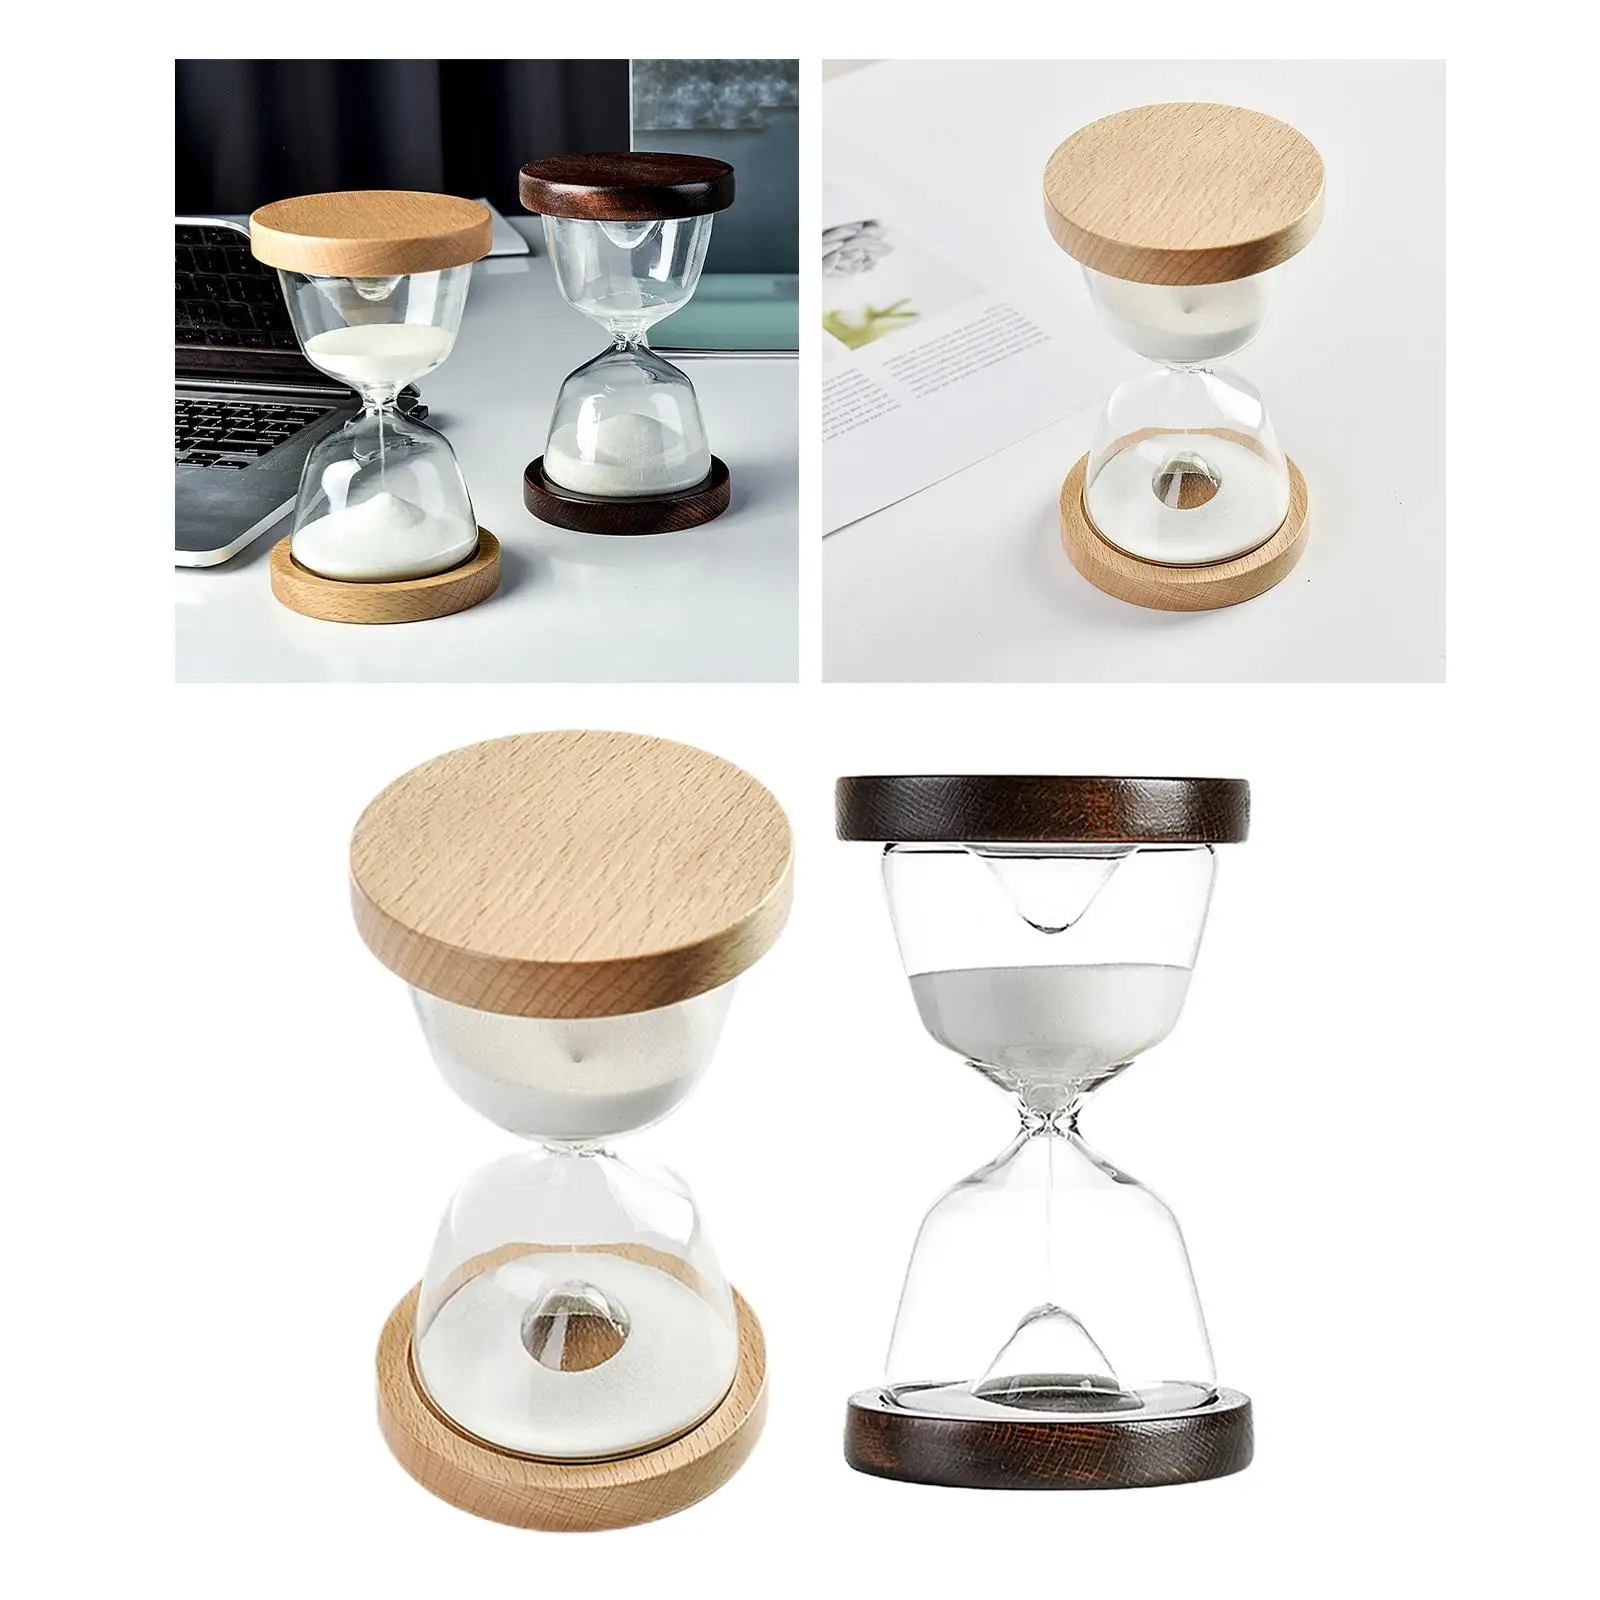 Dual Wood Base Wood Base Hour Glass Sandglass Timer 15 Min 16.5cm Height for Office Home Vintage Style Decorative White Sand